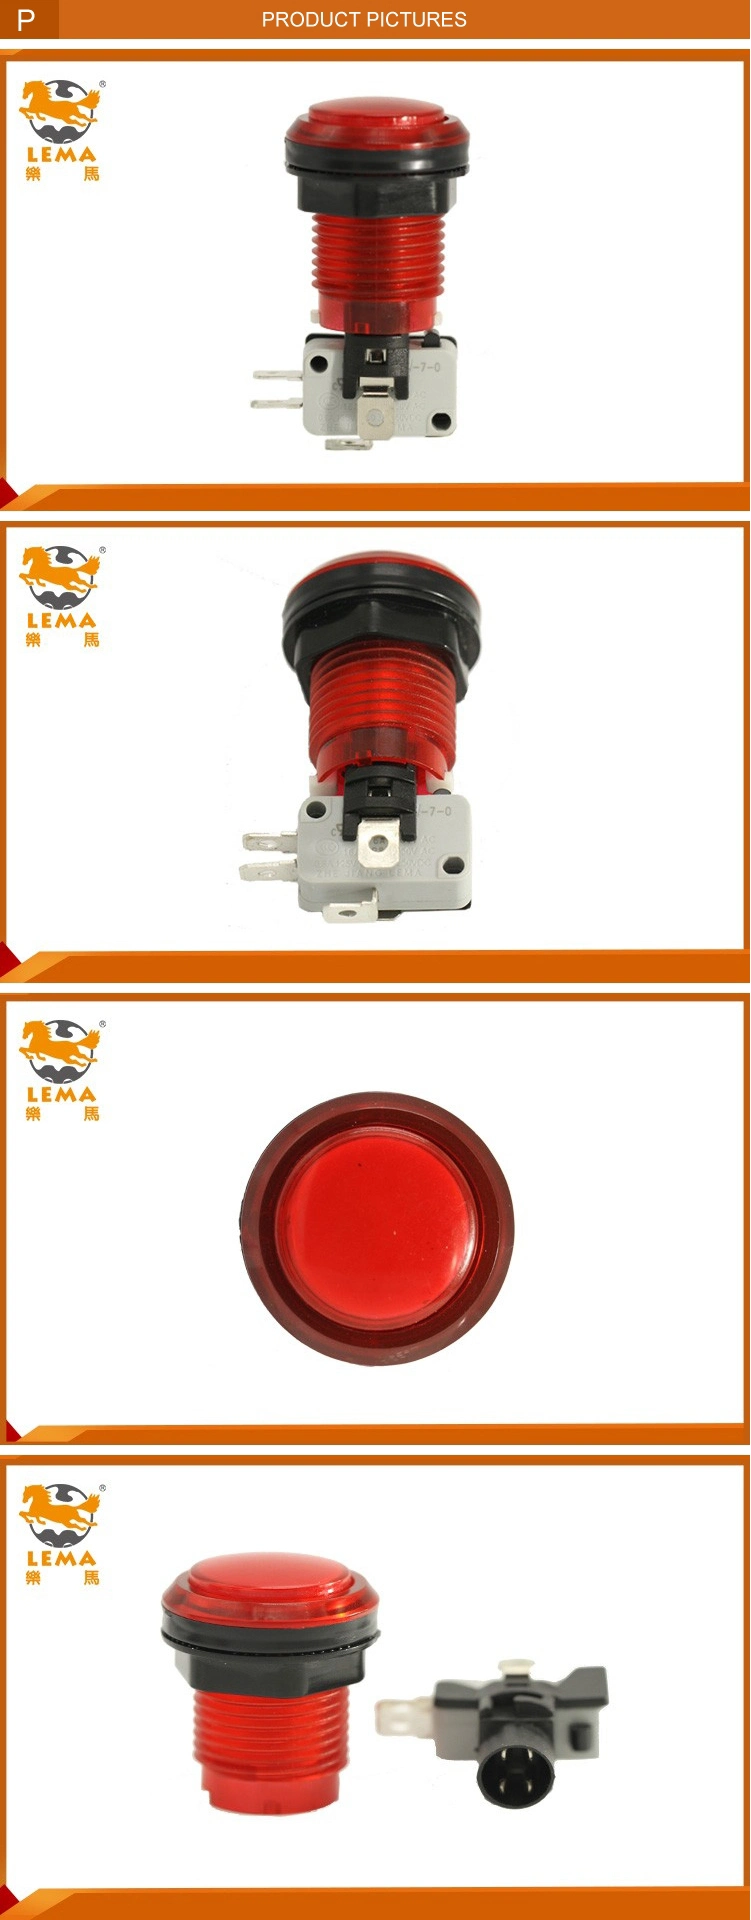 Electrical 3A 8A 16A Red Plastic LED Push Button Micro Switch Pbs-003